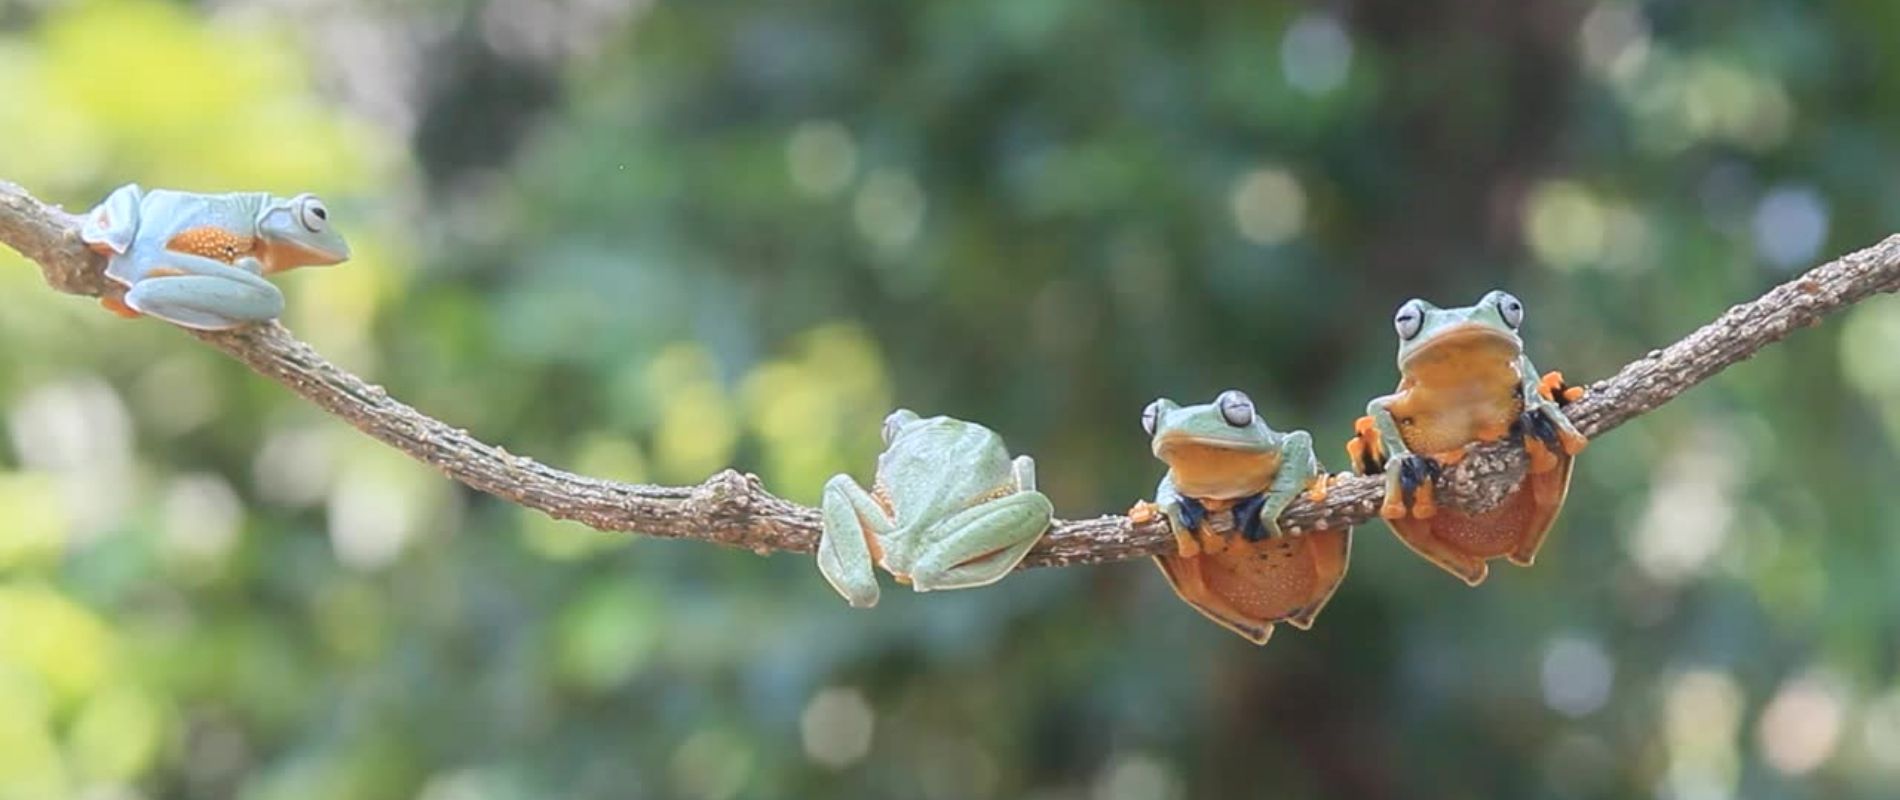 Four green tree frogs sit on a tree brach, two are facing the camera and two have their backs turned. In the background blurred trees can be seen.